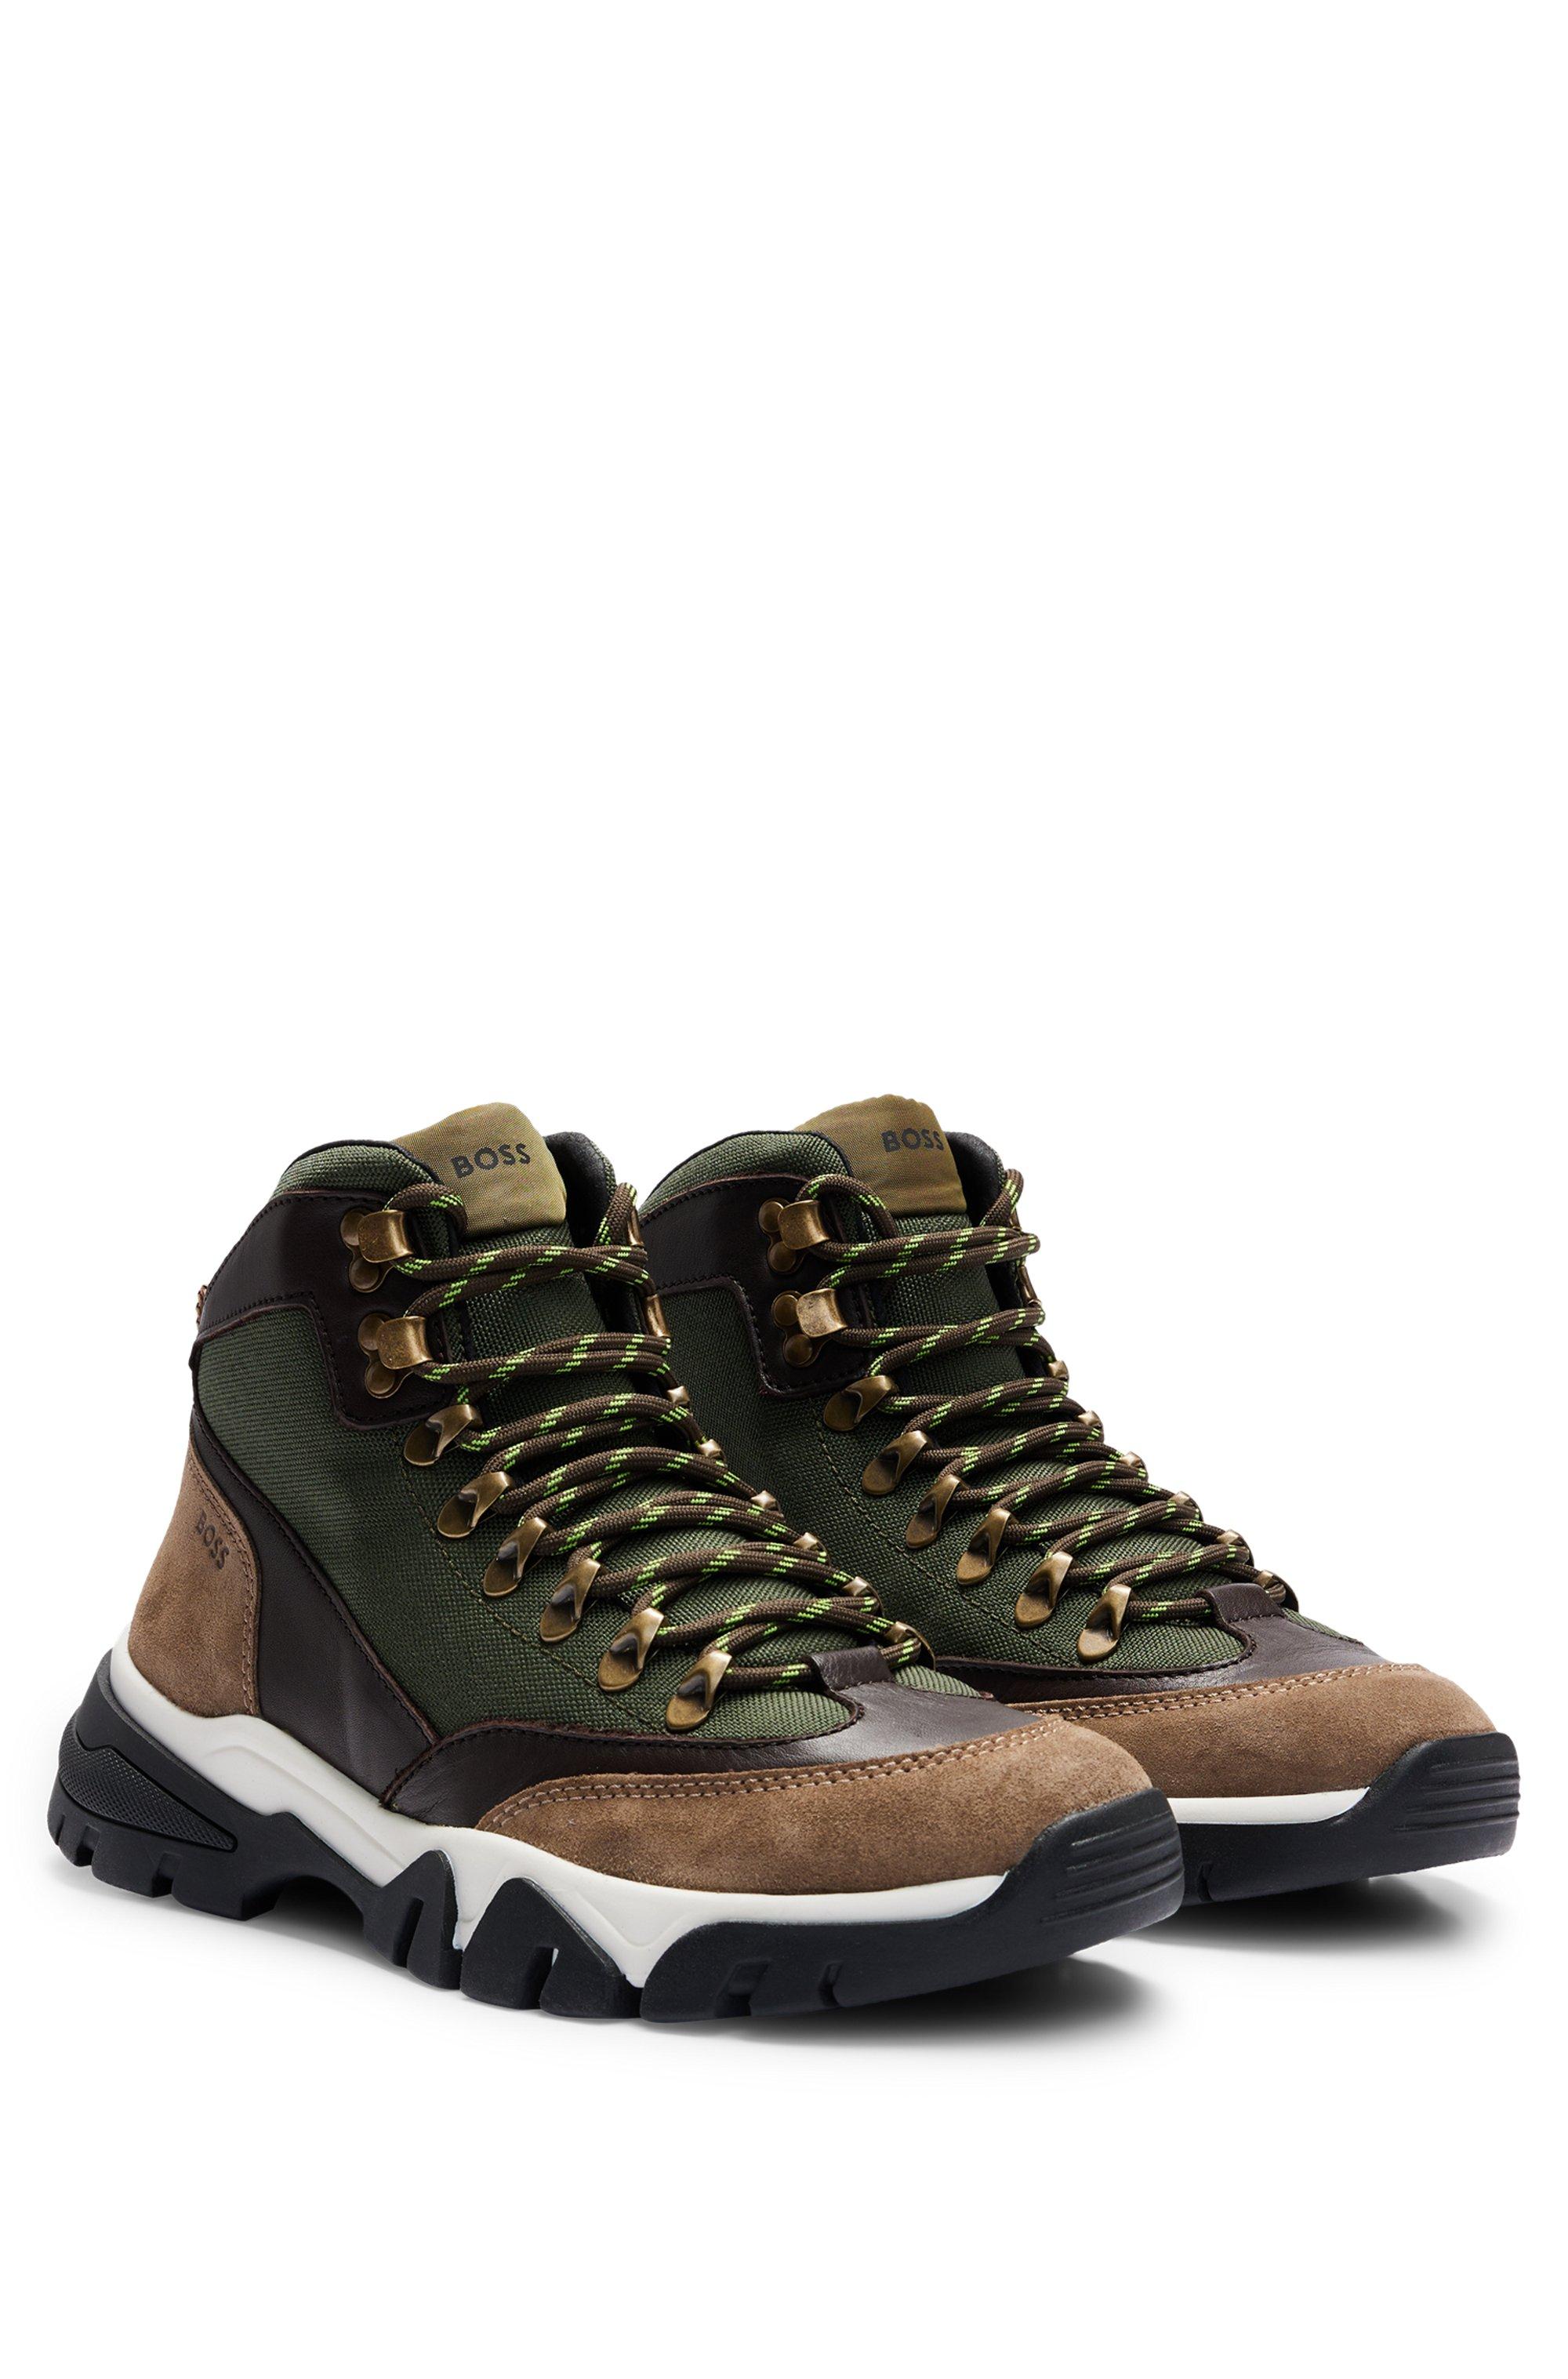 BOSS Hiking-inspired Boots In Suede And Leather in Green for Men | Lyst